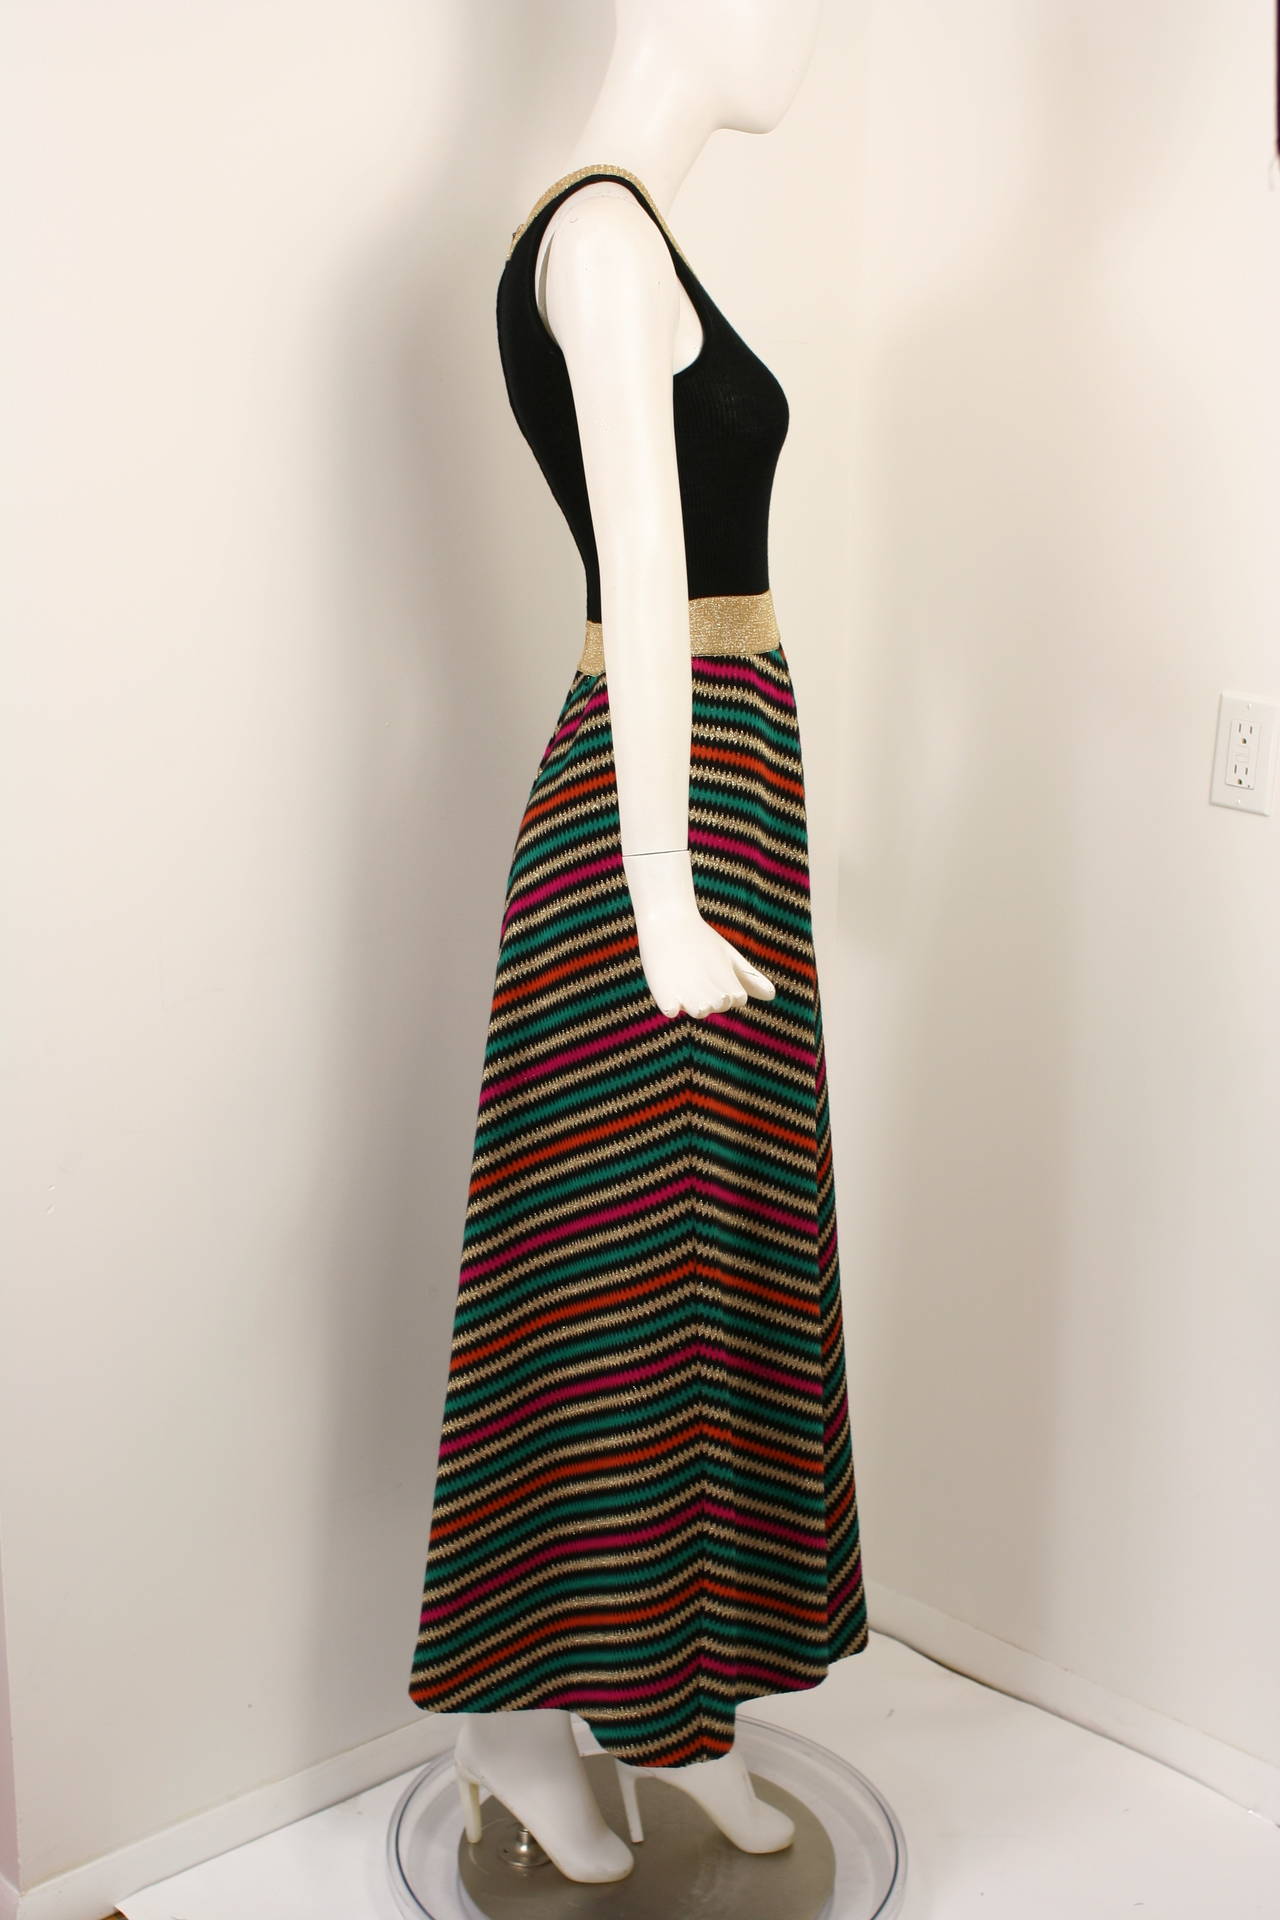 1970s Vintage Crissa Linea Italiana Knit Lame Maxi Dress In Excellent Condition For Sale In New York, NY